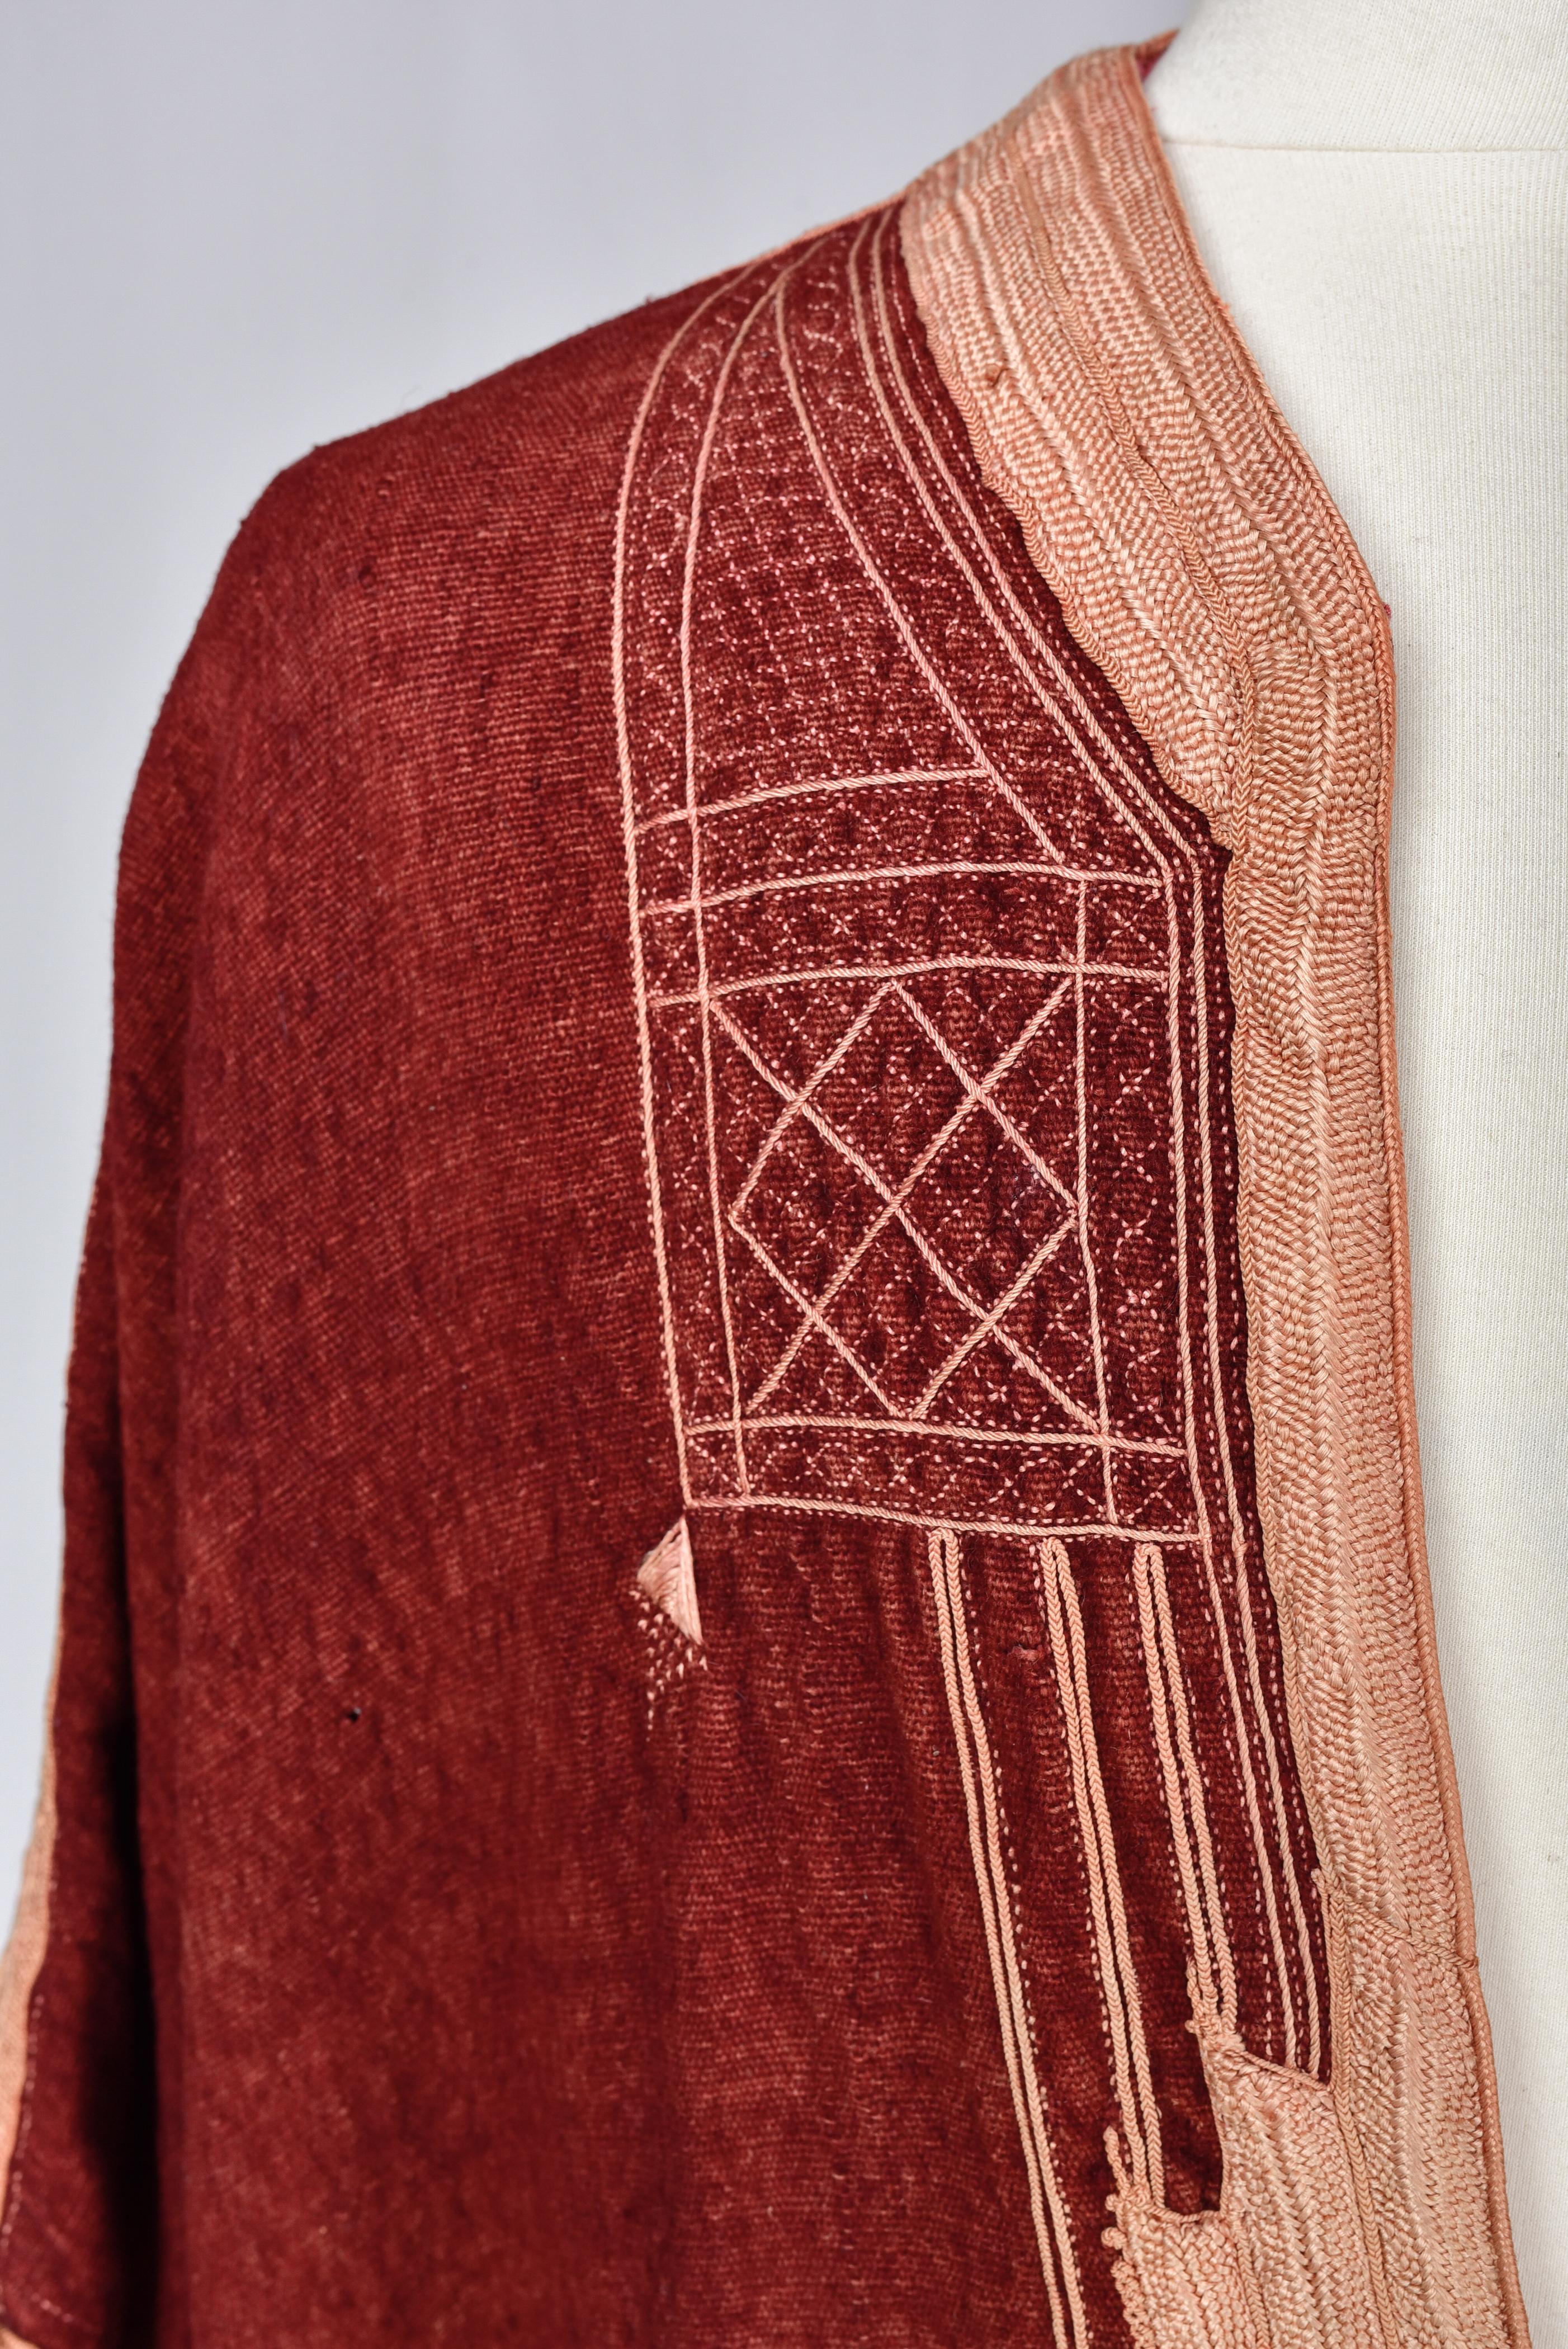 A Berber Djellaba in Dyed Cochineal Embroidered Wool - North Africa Circa 1900 For Sale 5